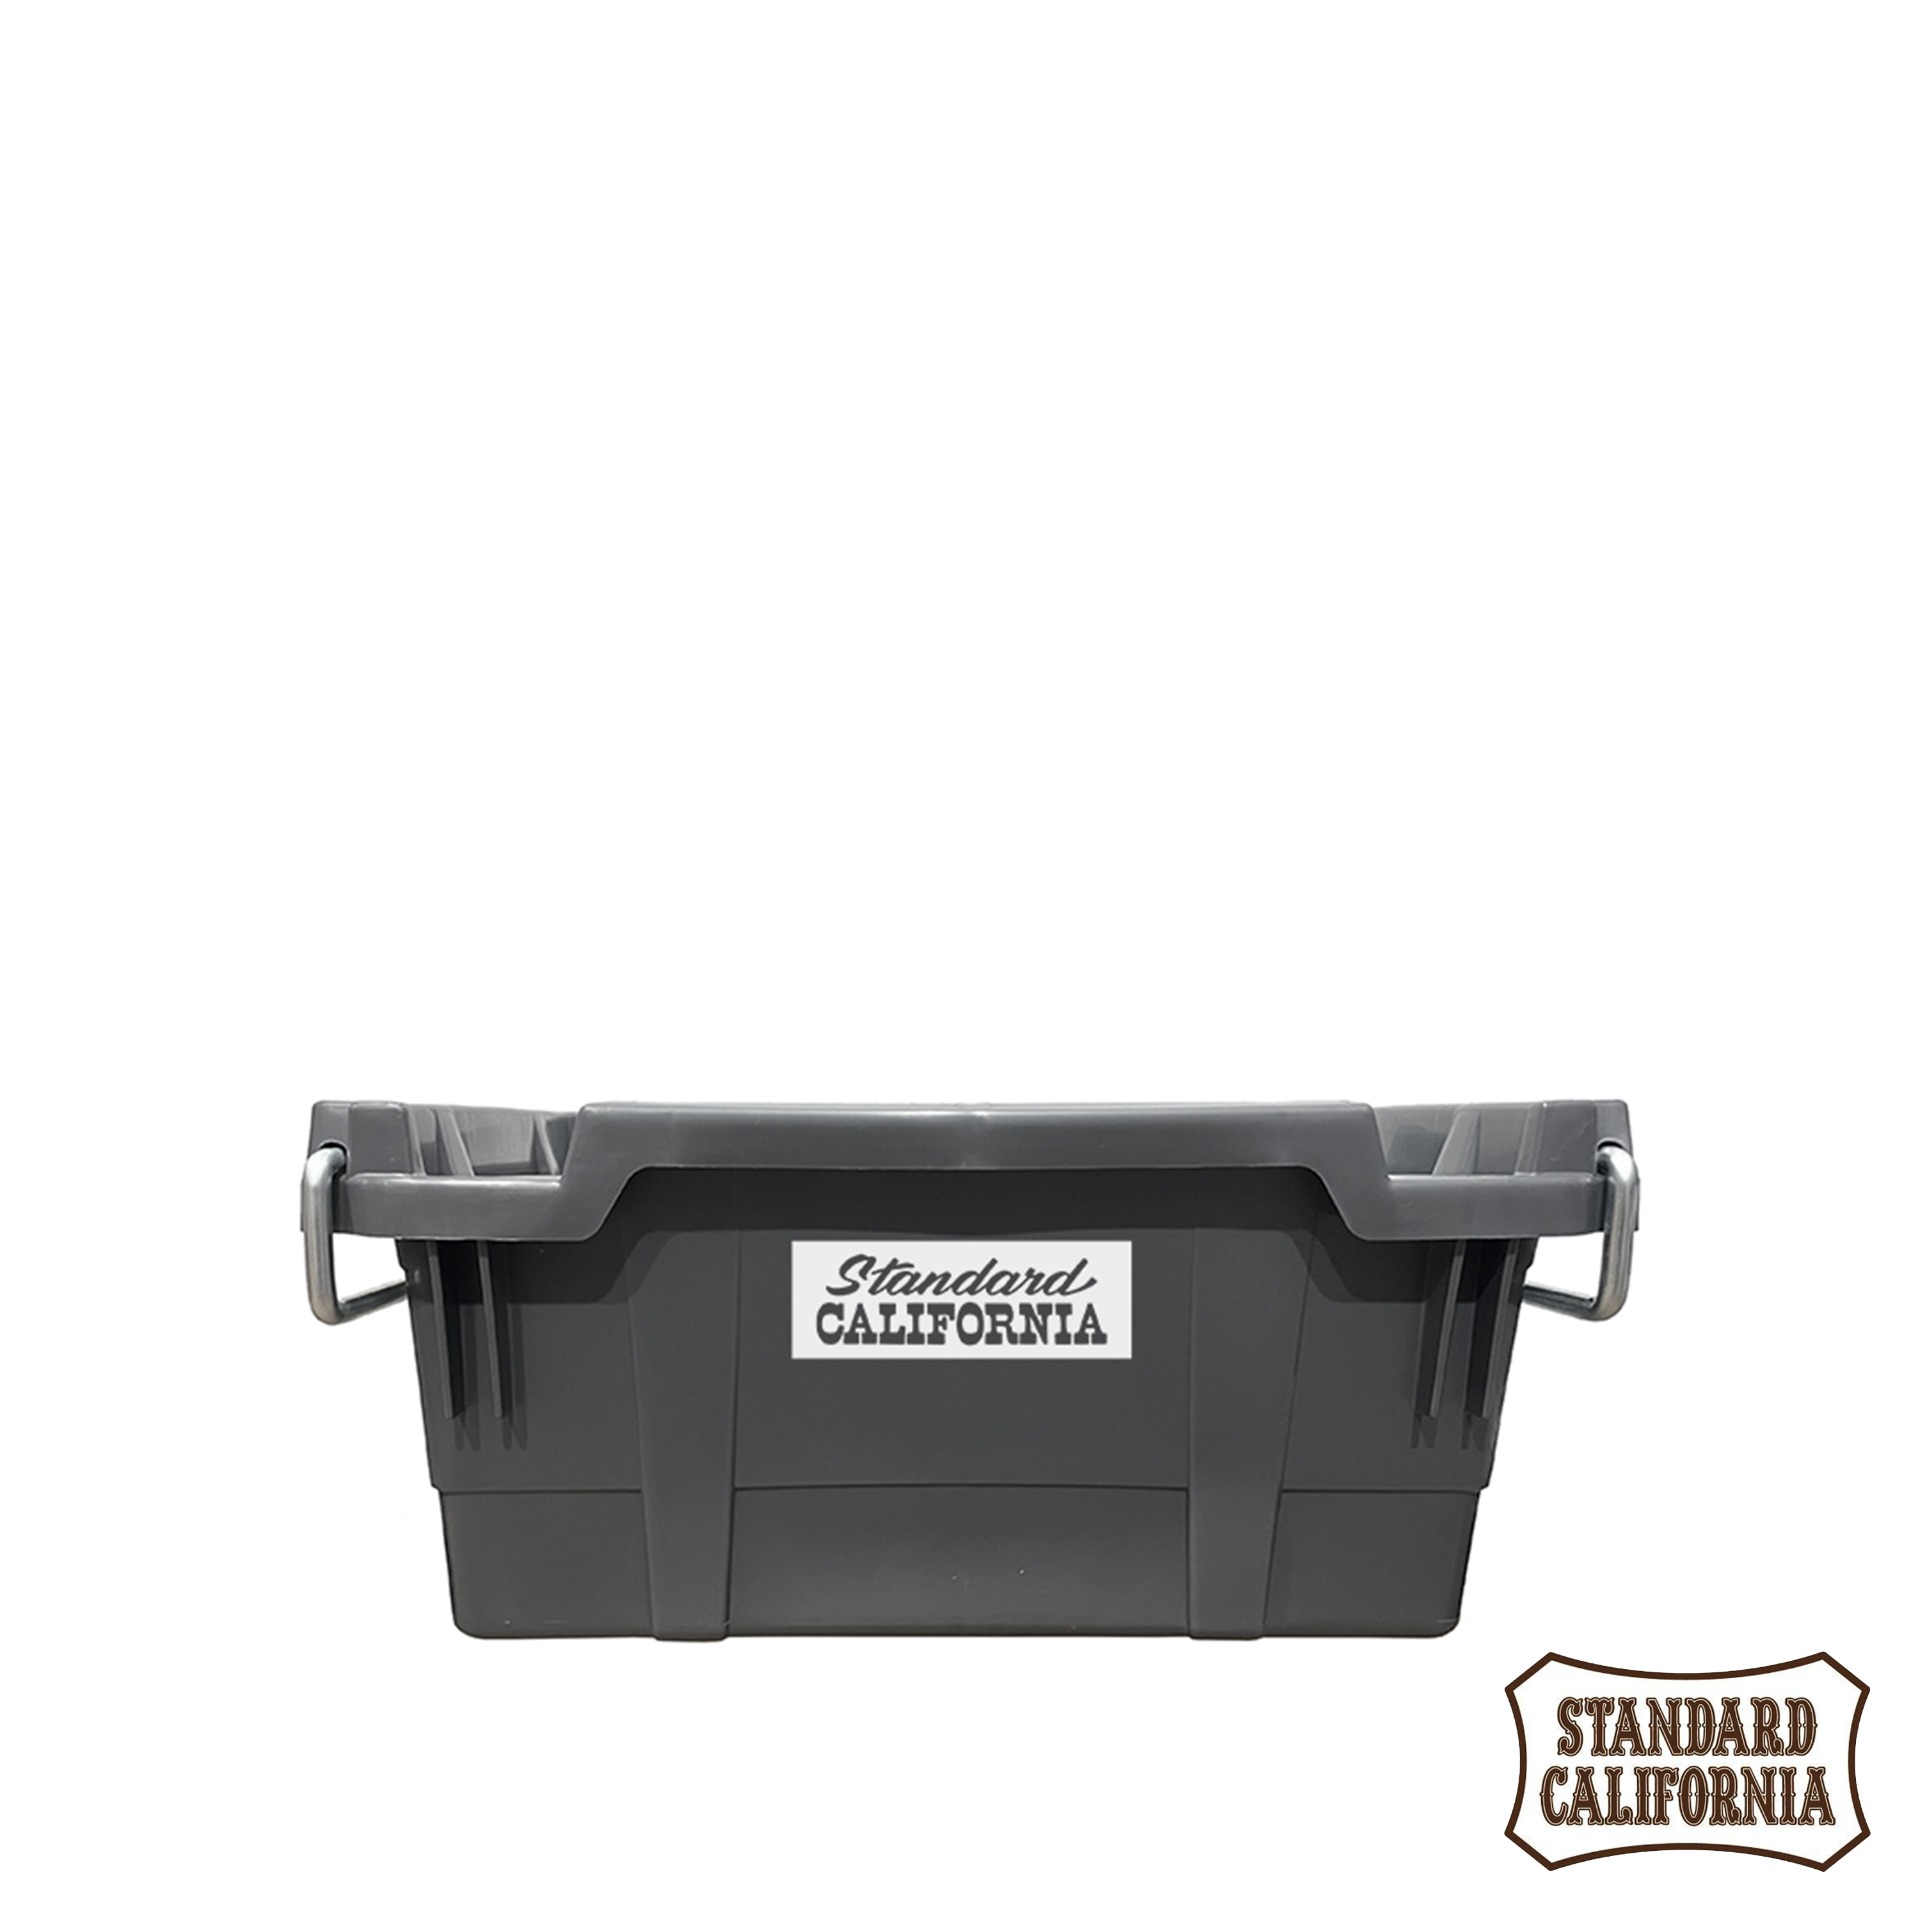 SD STACKING CONTAINER (Gray)